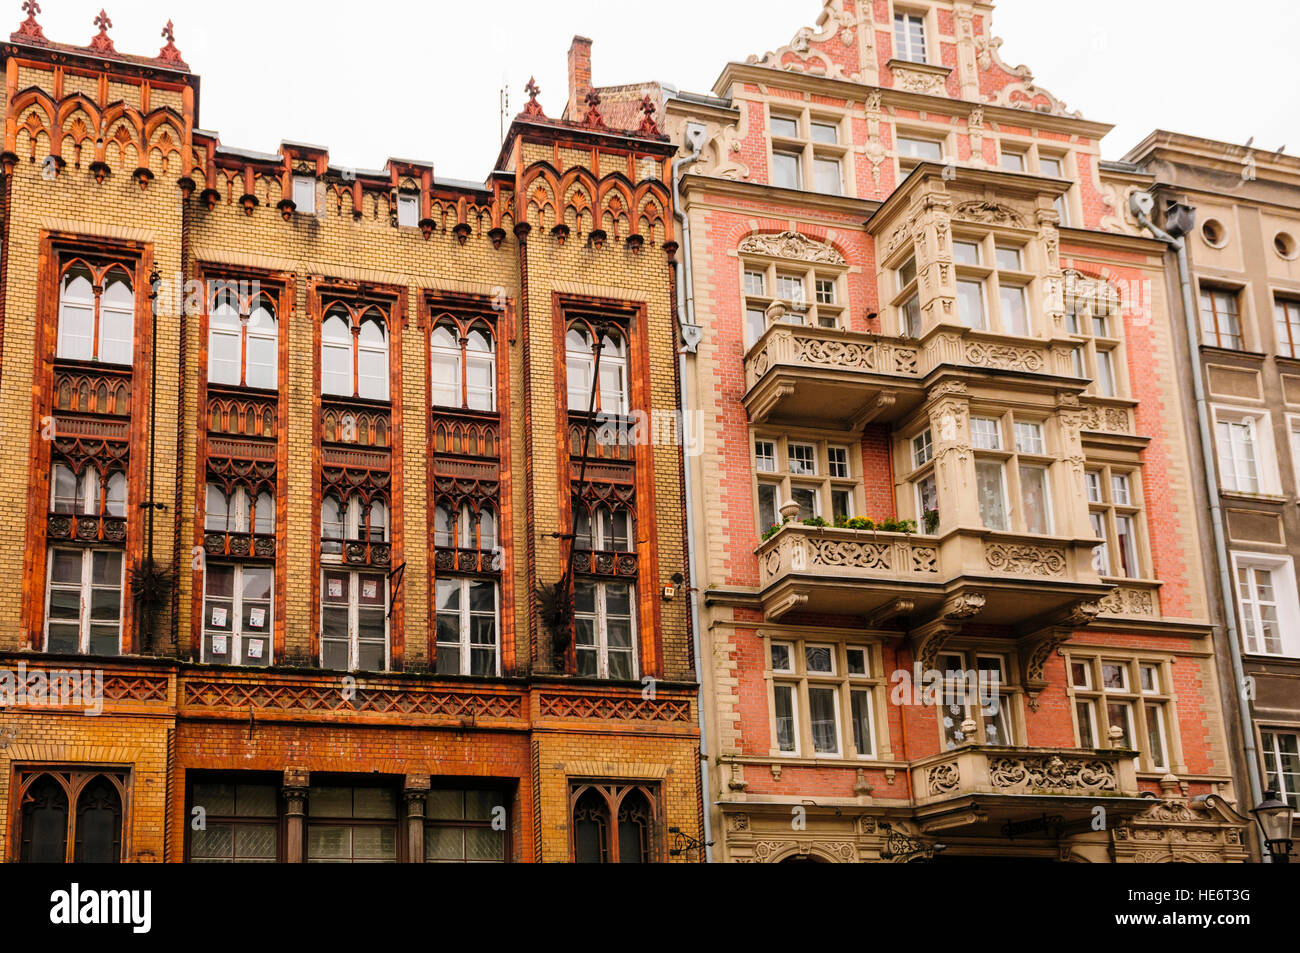 Building with ornate stone balconies and windows in Gdansk, Poland Stock Photo